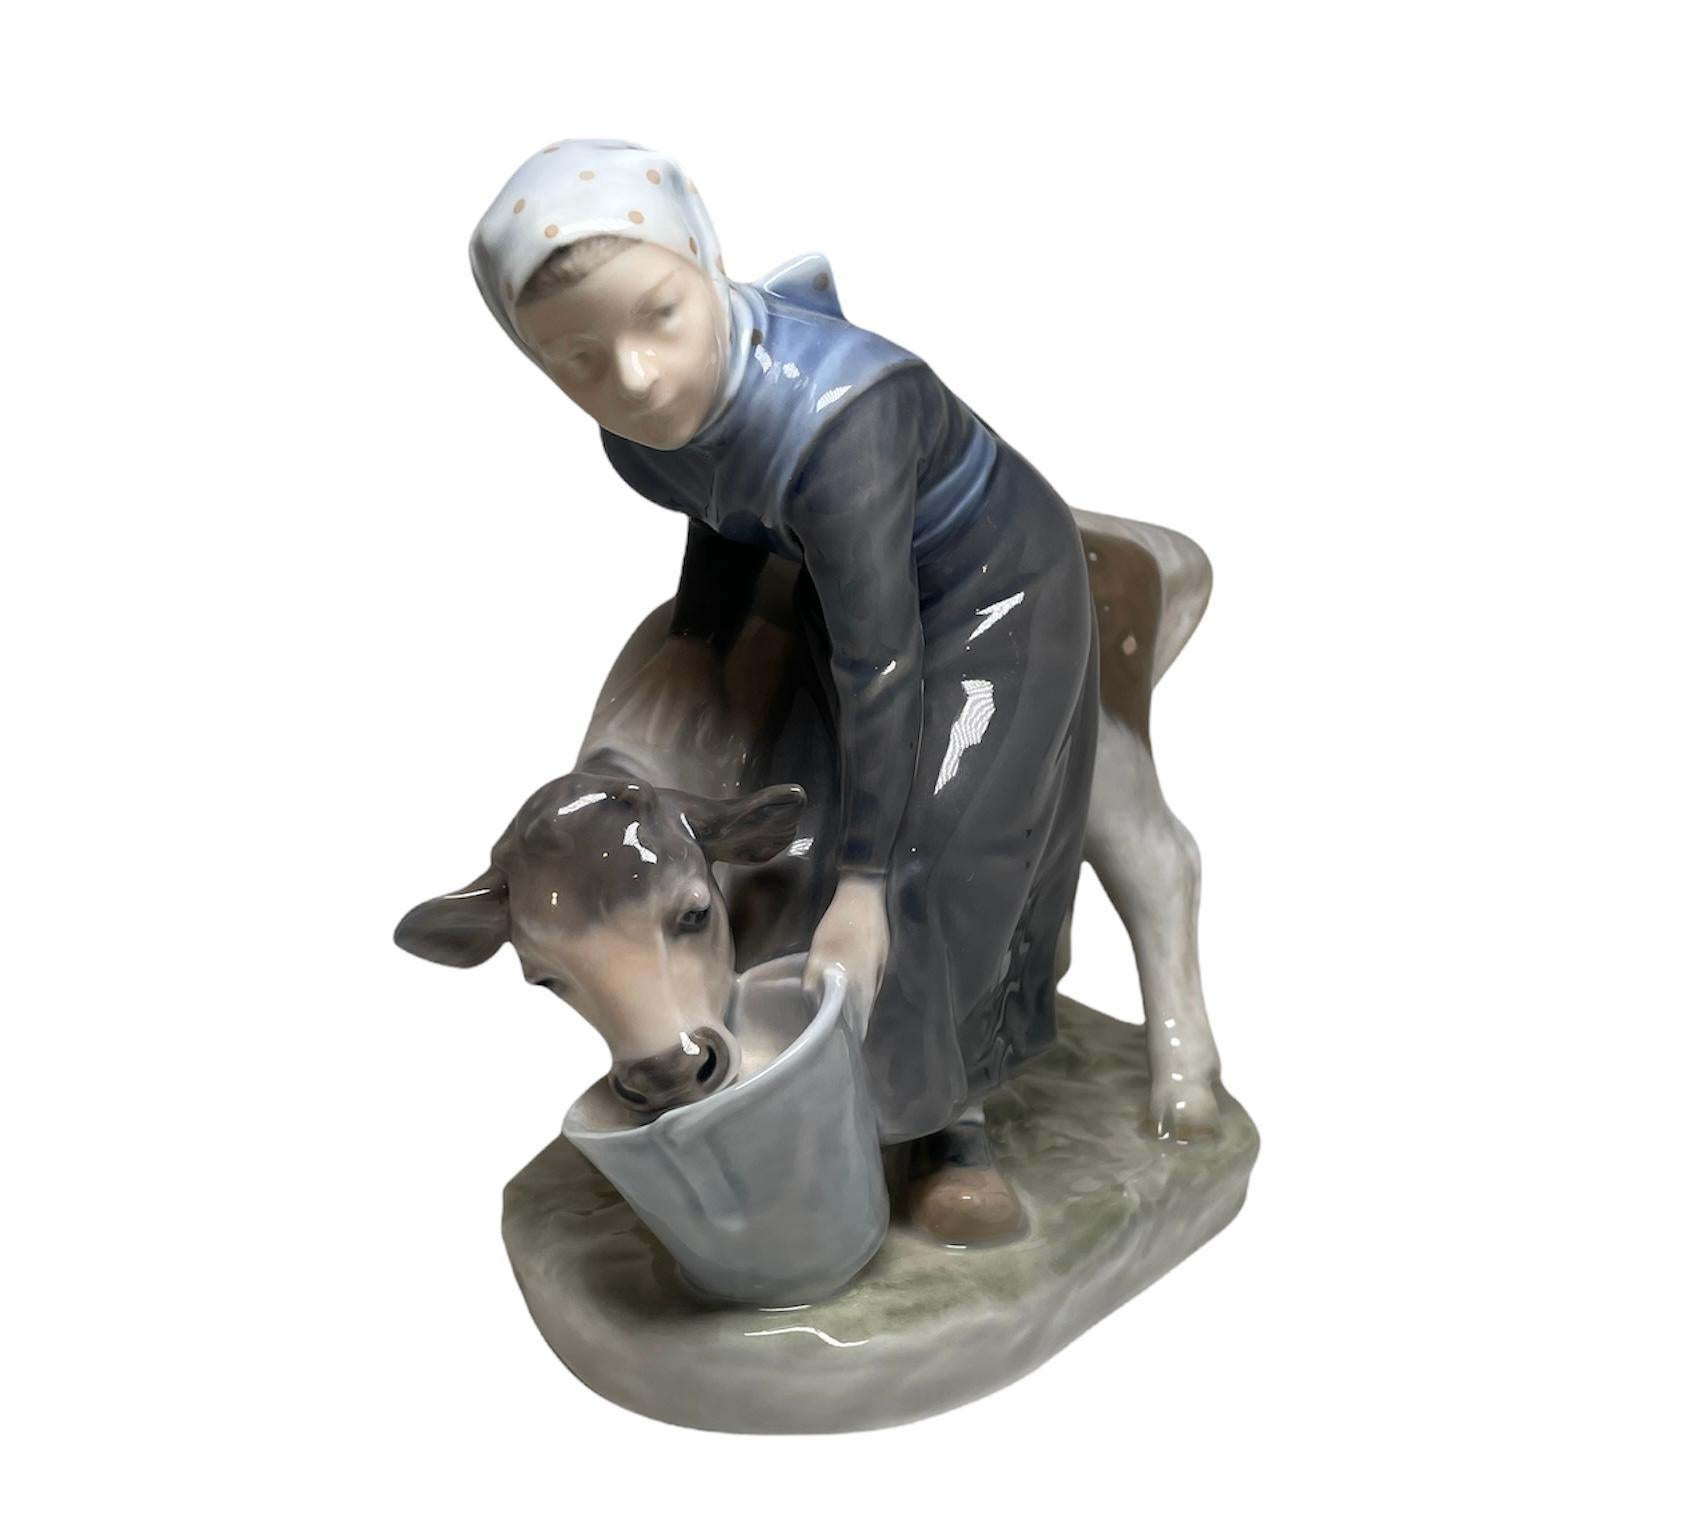 This is a Royal Copenhagen glazed hand painted porcelain figurine of a Danish young girl peasant feeding a calf from a big bucket. Below the base, it is found the Royal Copenhagen hallmark.